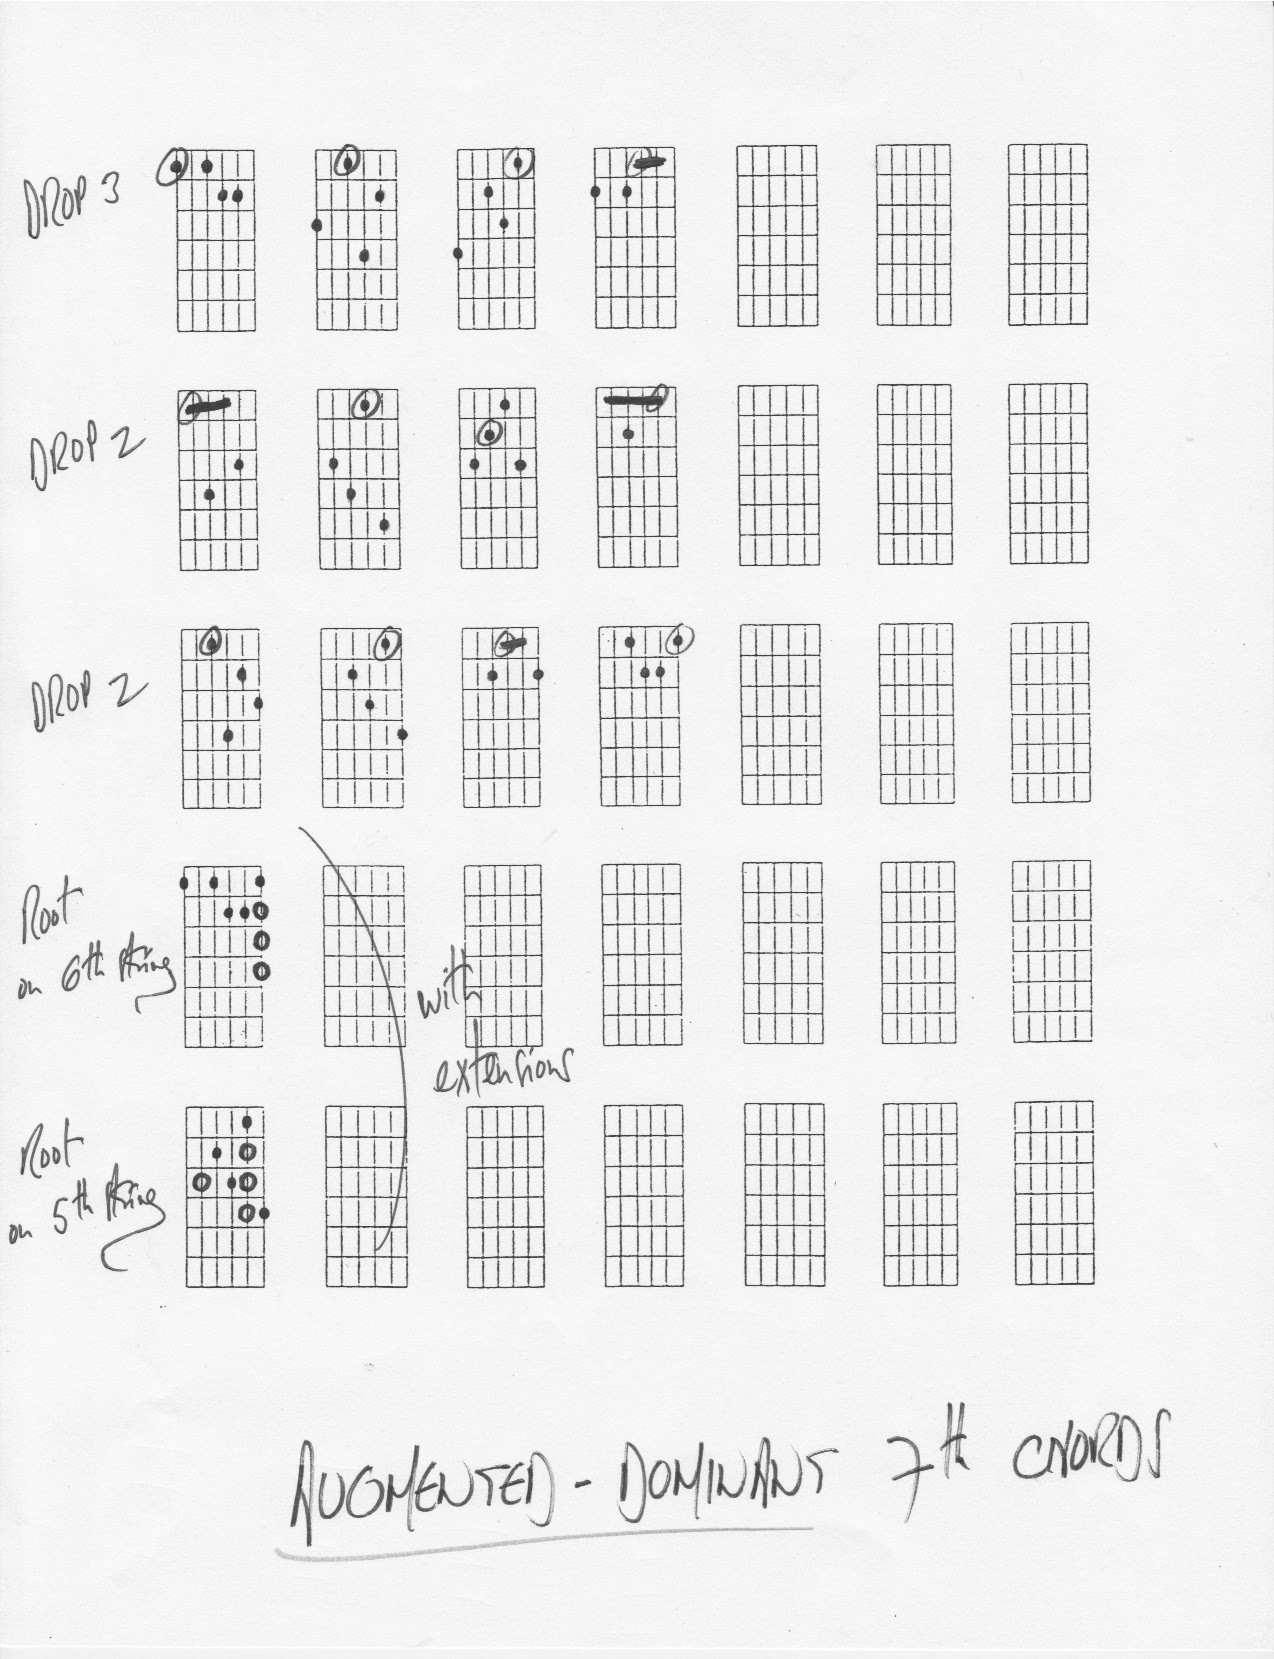 What Is An Augmented 7 Chord The Augmented Dominant Chord The 7 Chord Bruno Pelletier